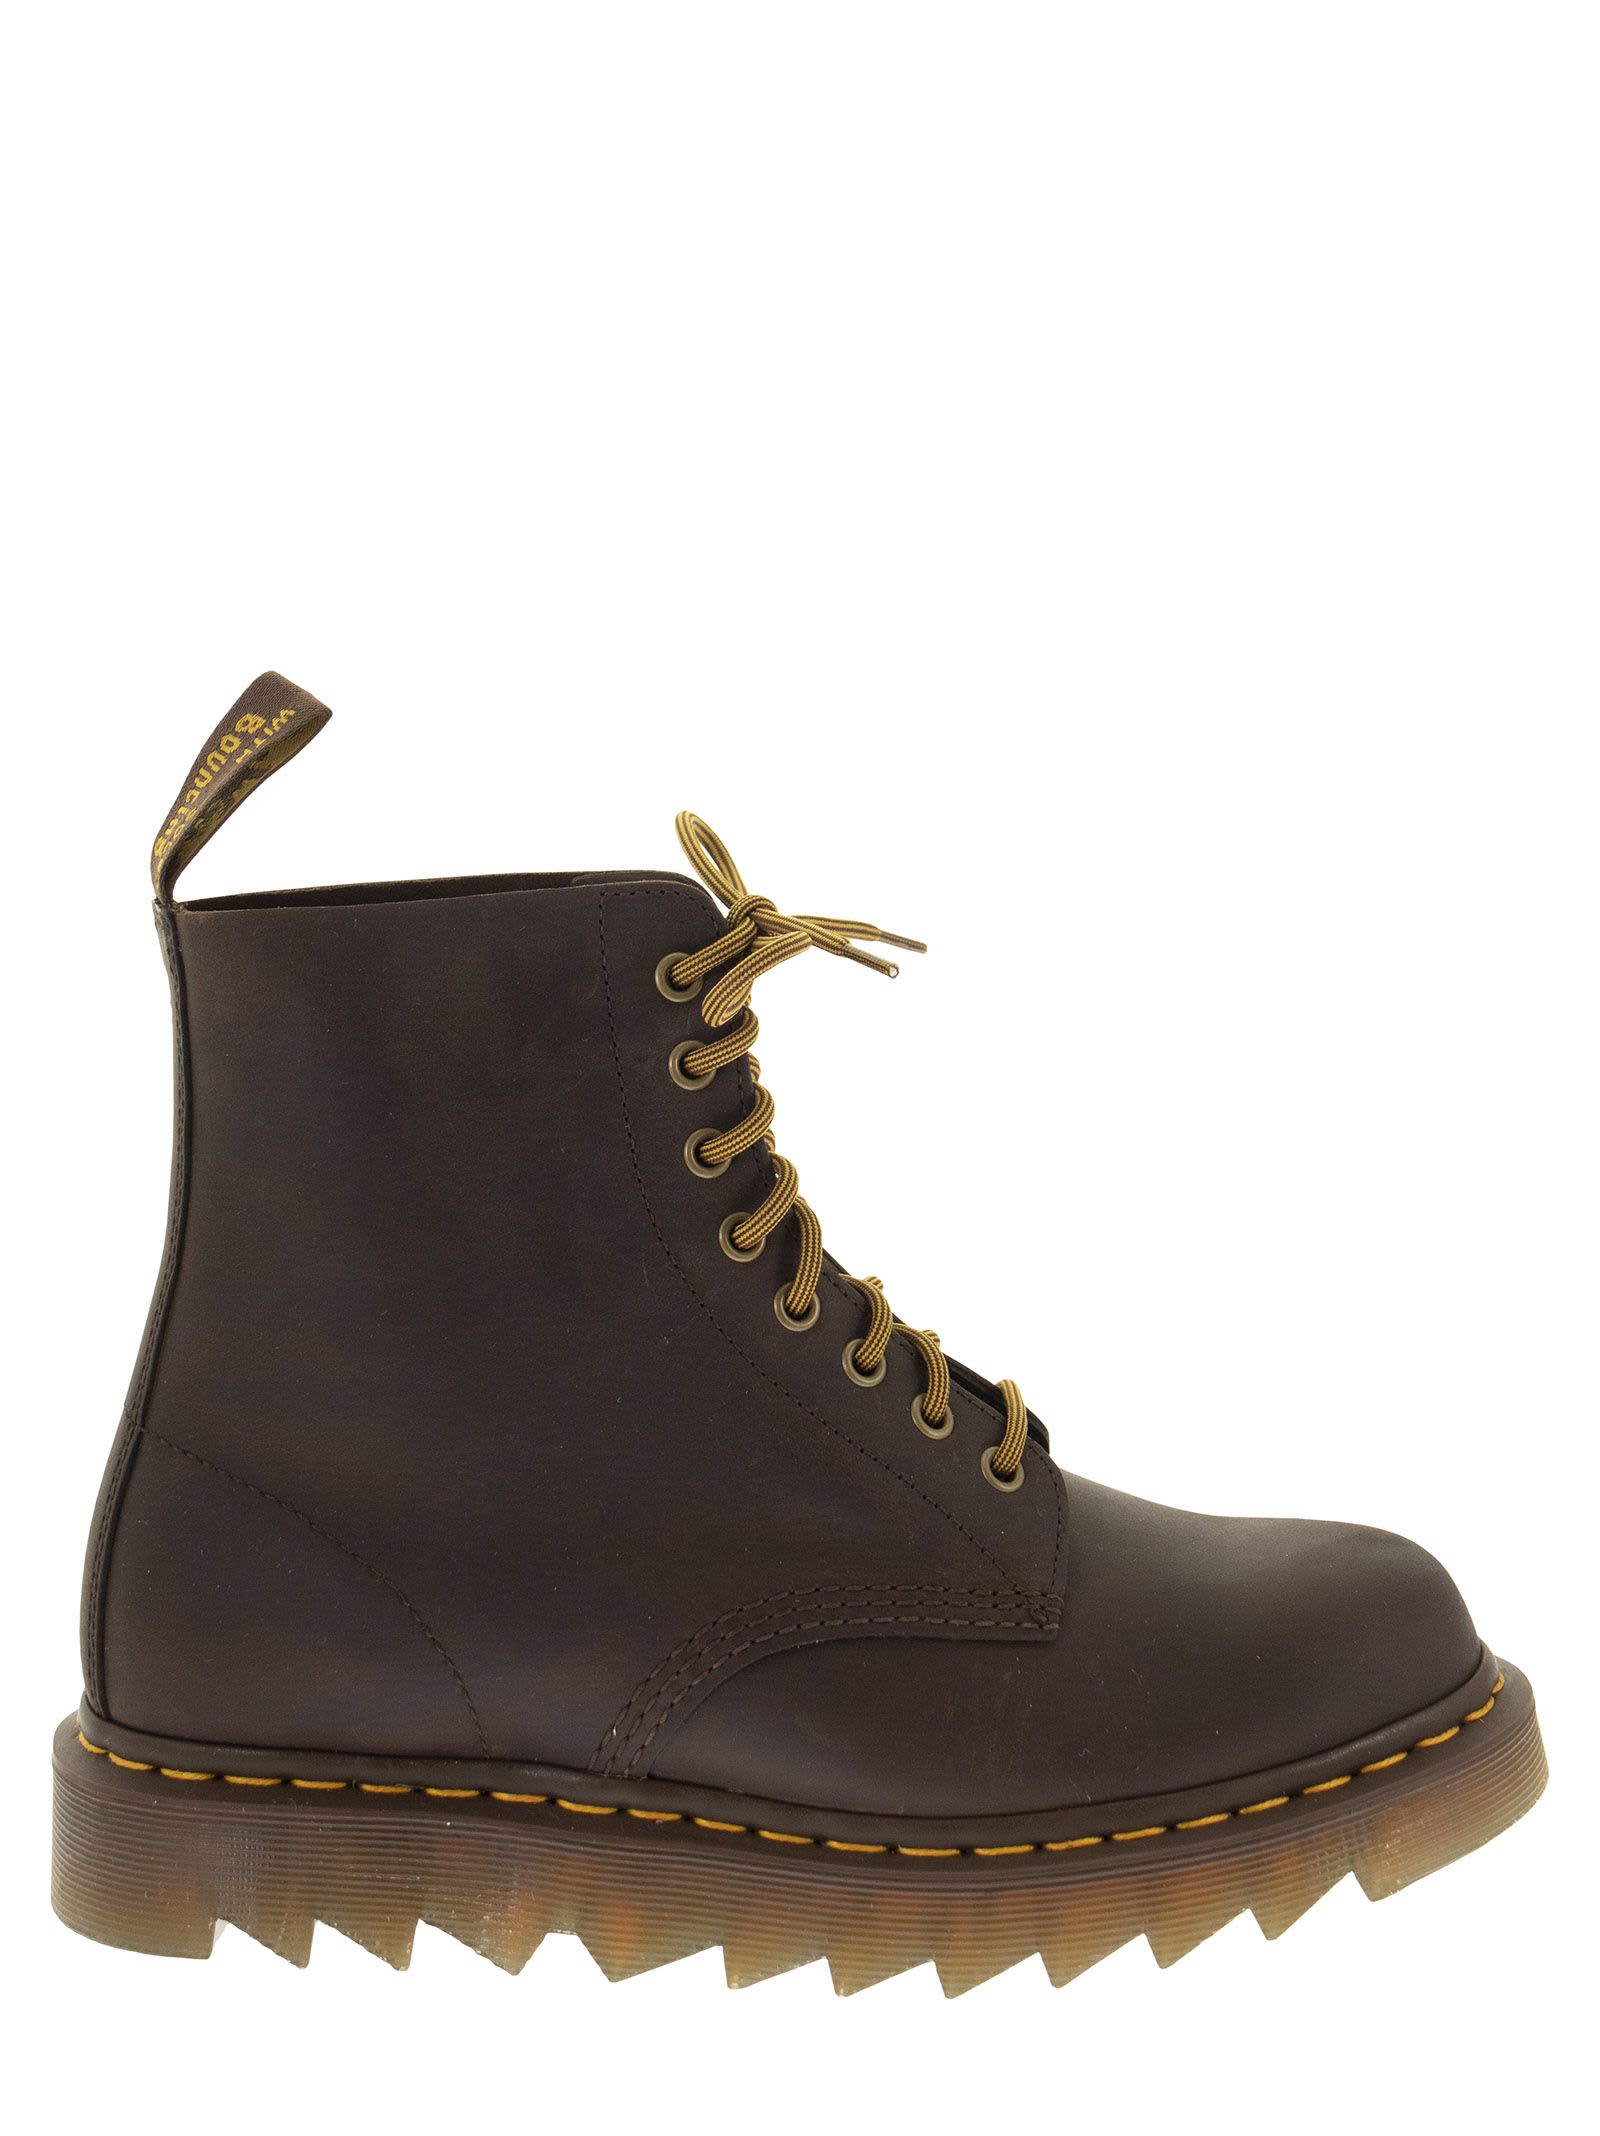 Dr. Martens 1460 Ziggy - Lace-up Boot